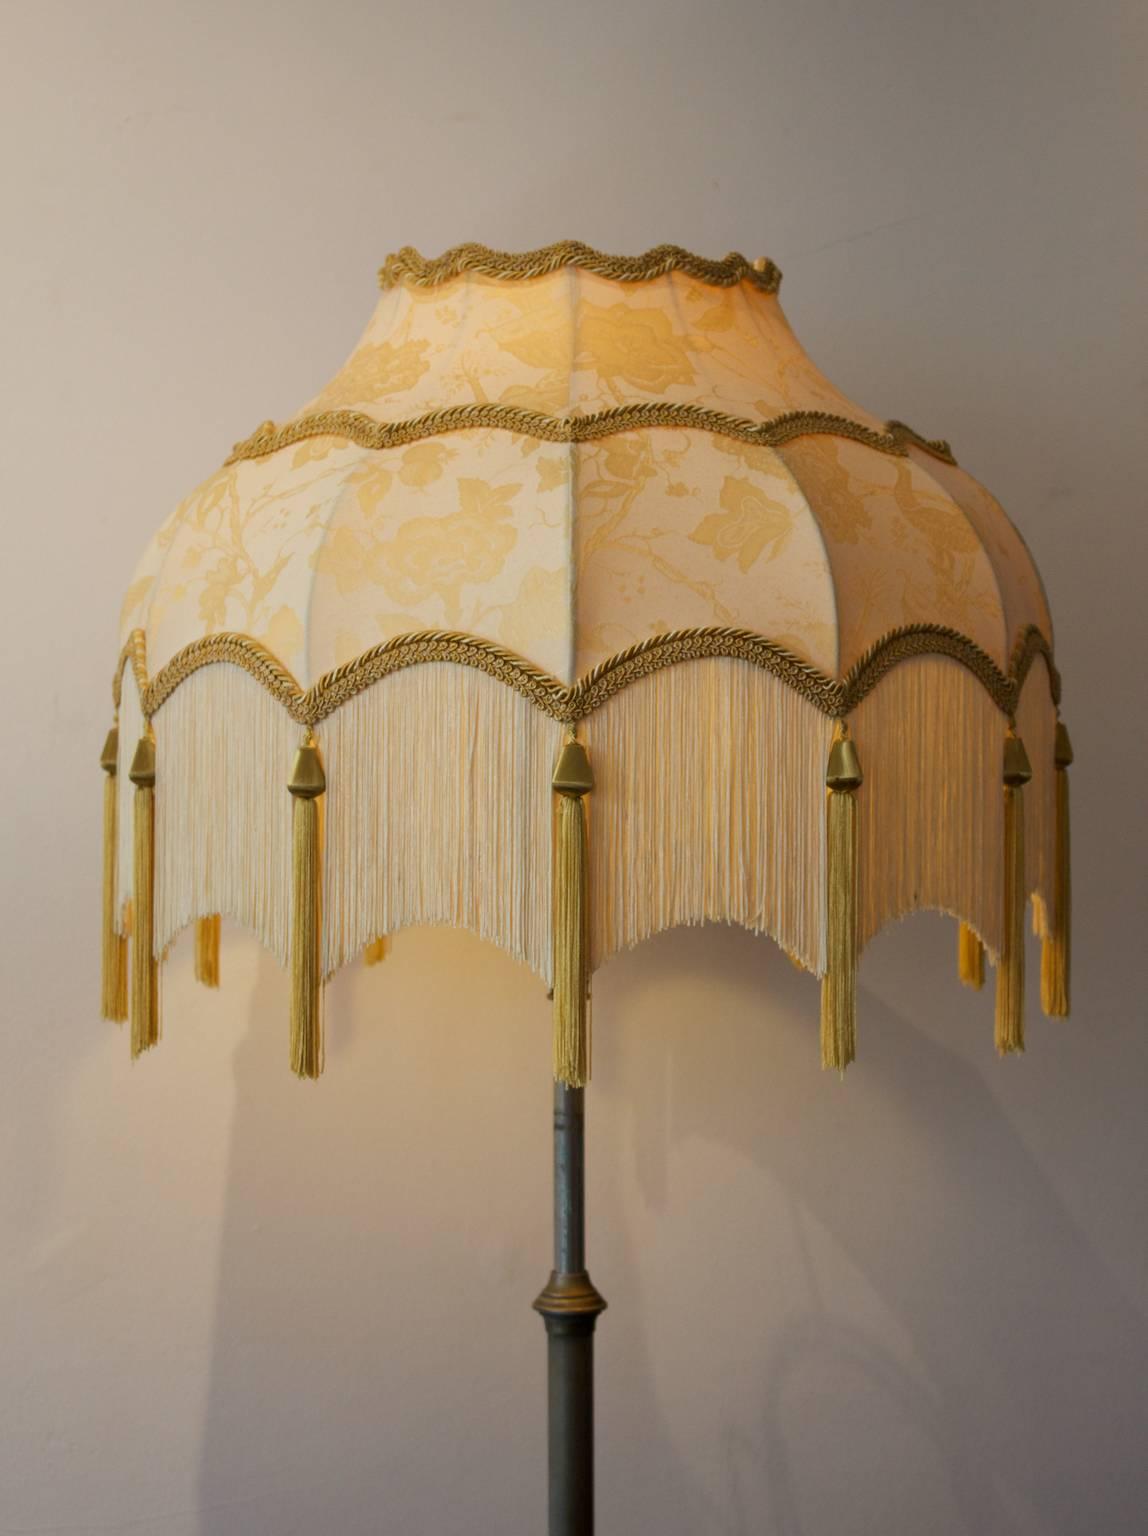 An arts and crafts lamp with large fringed shade. Early 20th century, England.

Figured lamp base of brass plated steel on tripod legs, with flamboyant fabric shade - later work - very nicely made with good lining and gold fringes. 

The lamp base